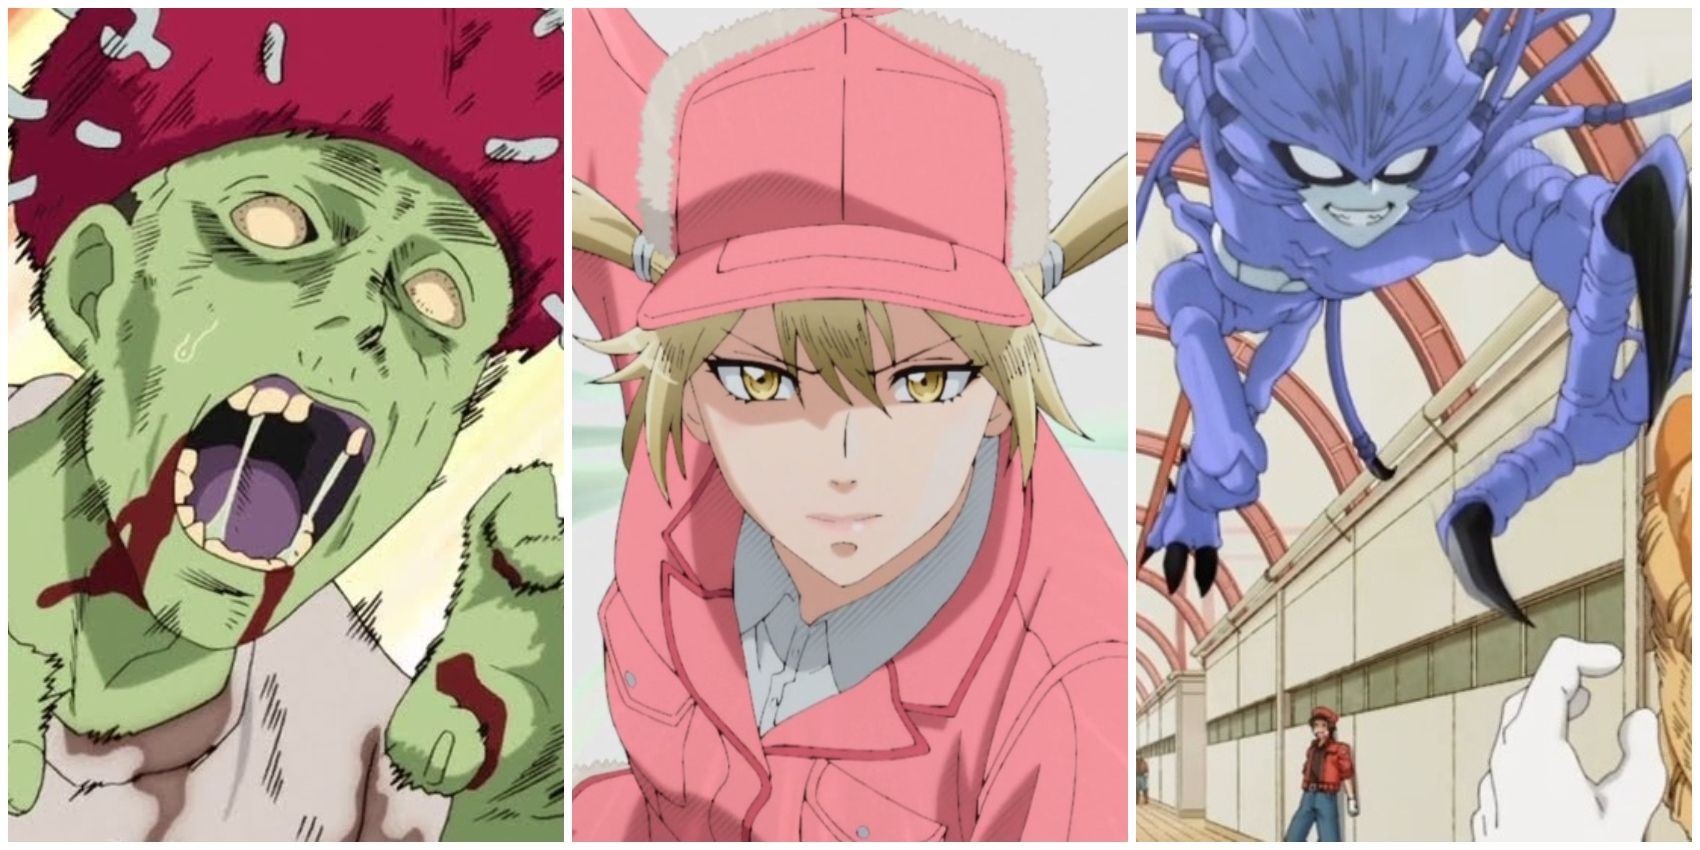 Cells At Work!: The 10 Best Episodes (According To IMDb)